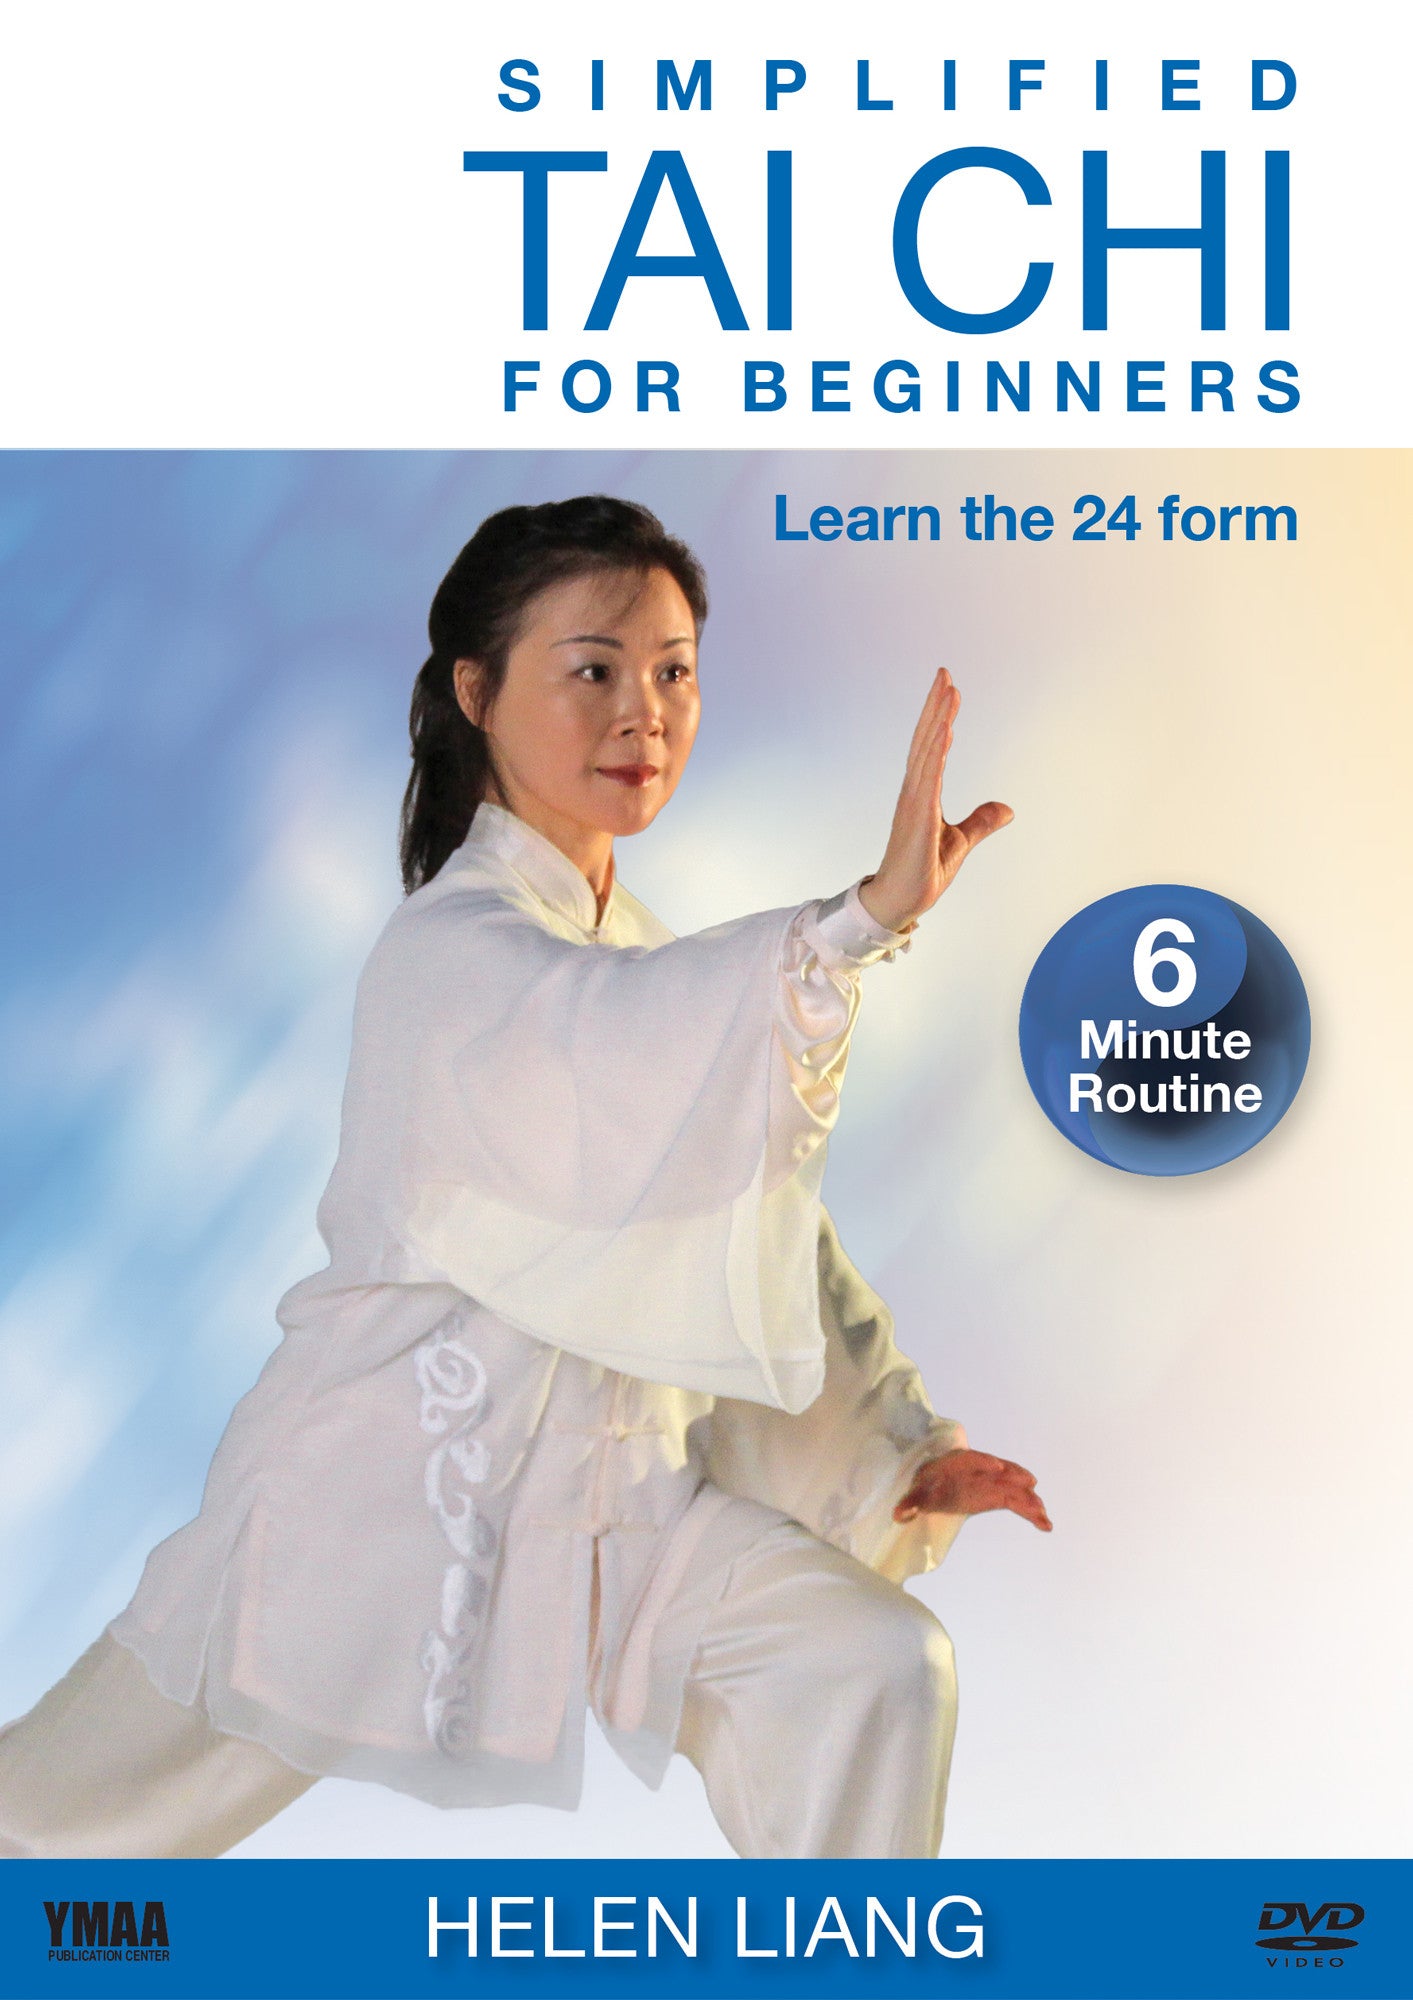 Simplified Tai Chi for Beginners 24 Form DVD by Helen Liang - Budovideos Inc